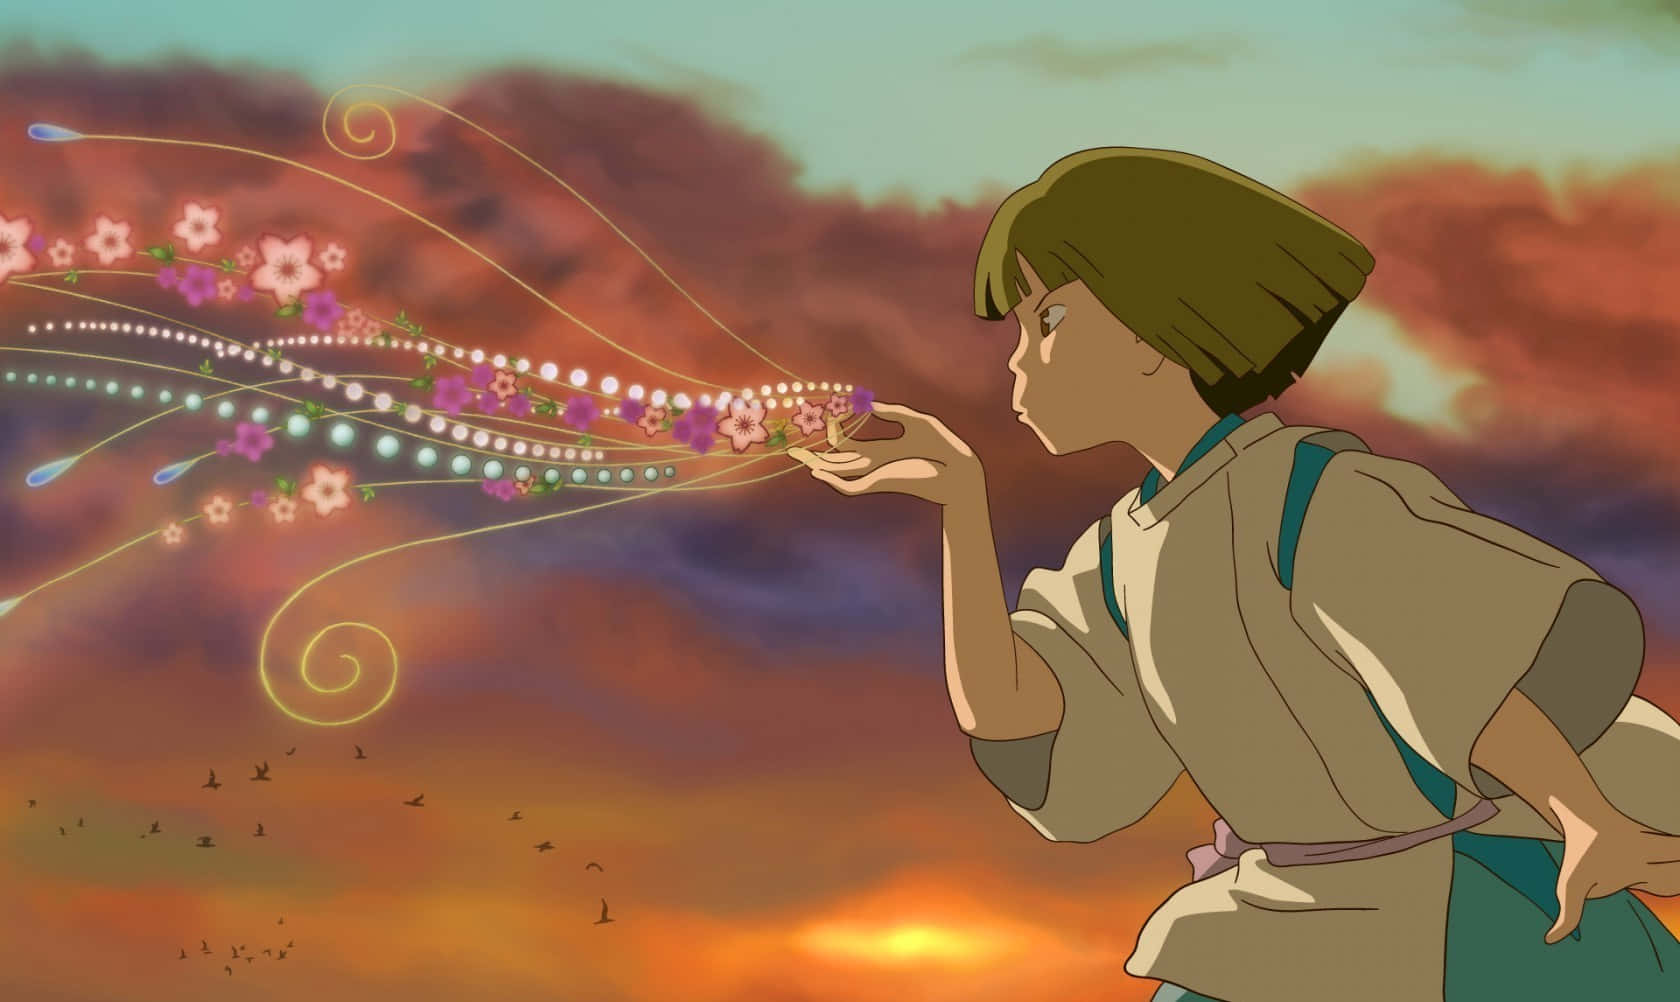 Lost in the world of Spirited Away